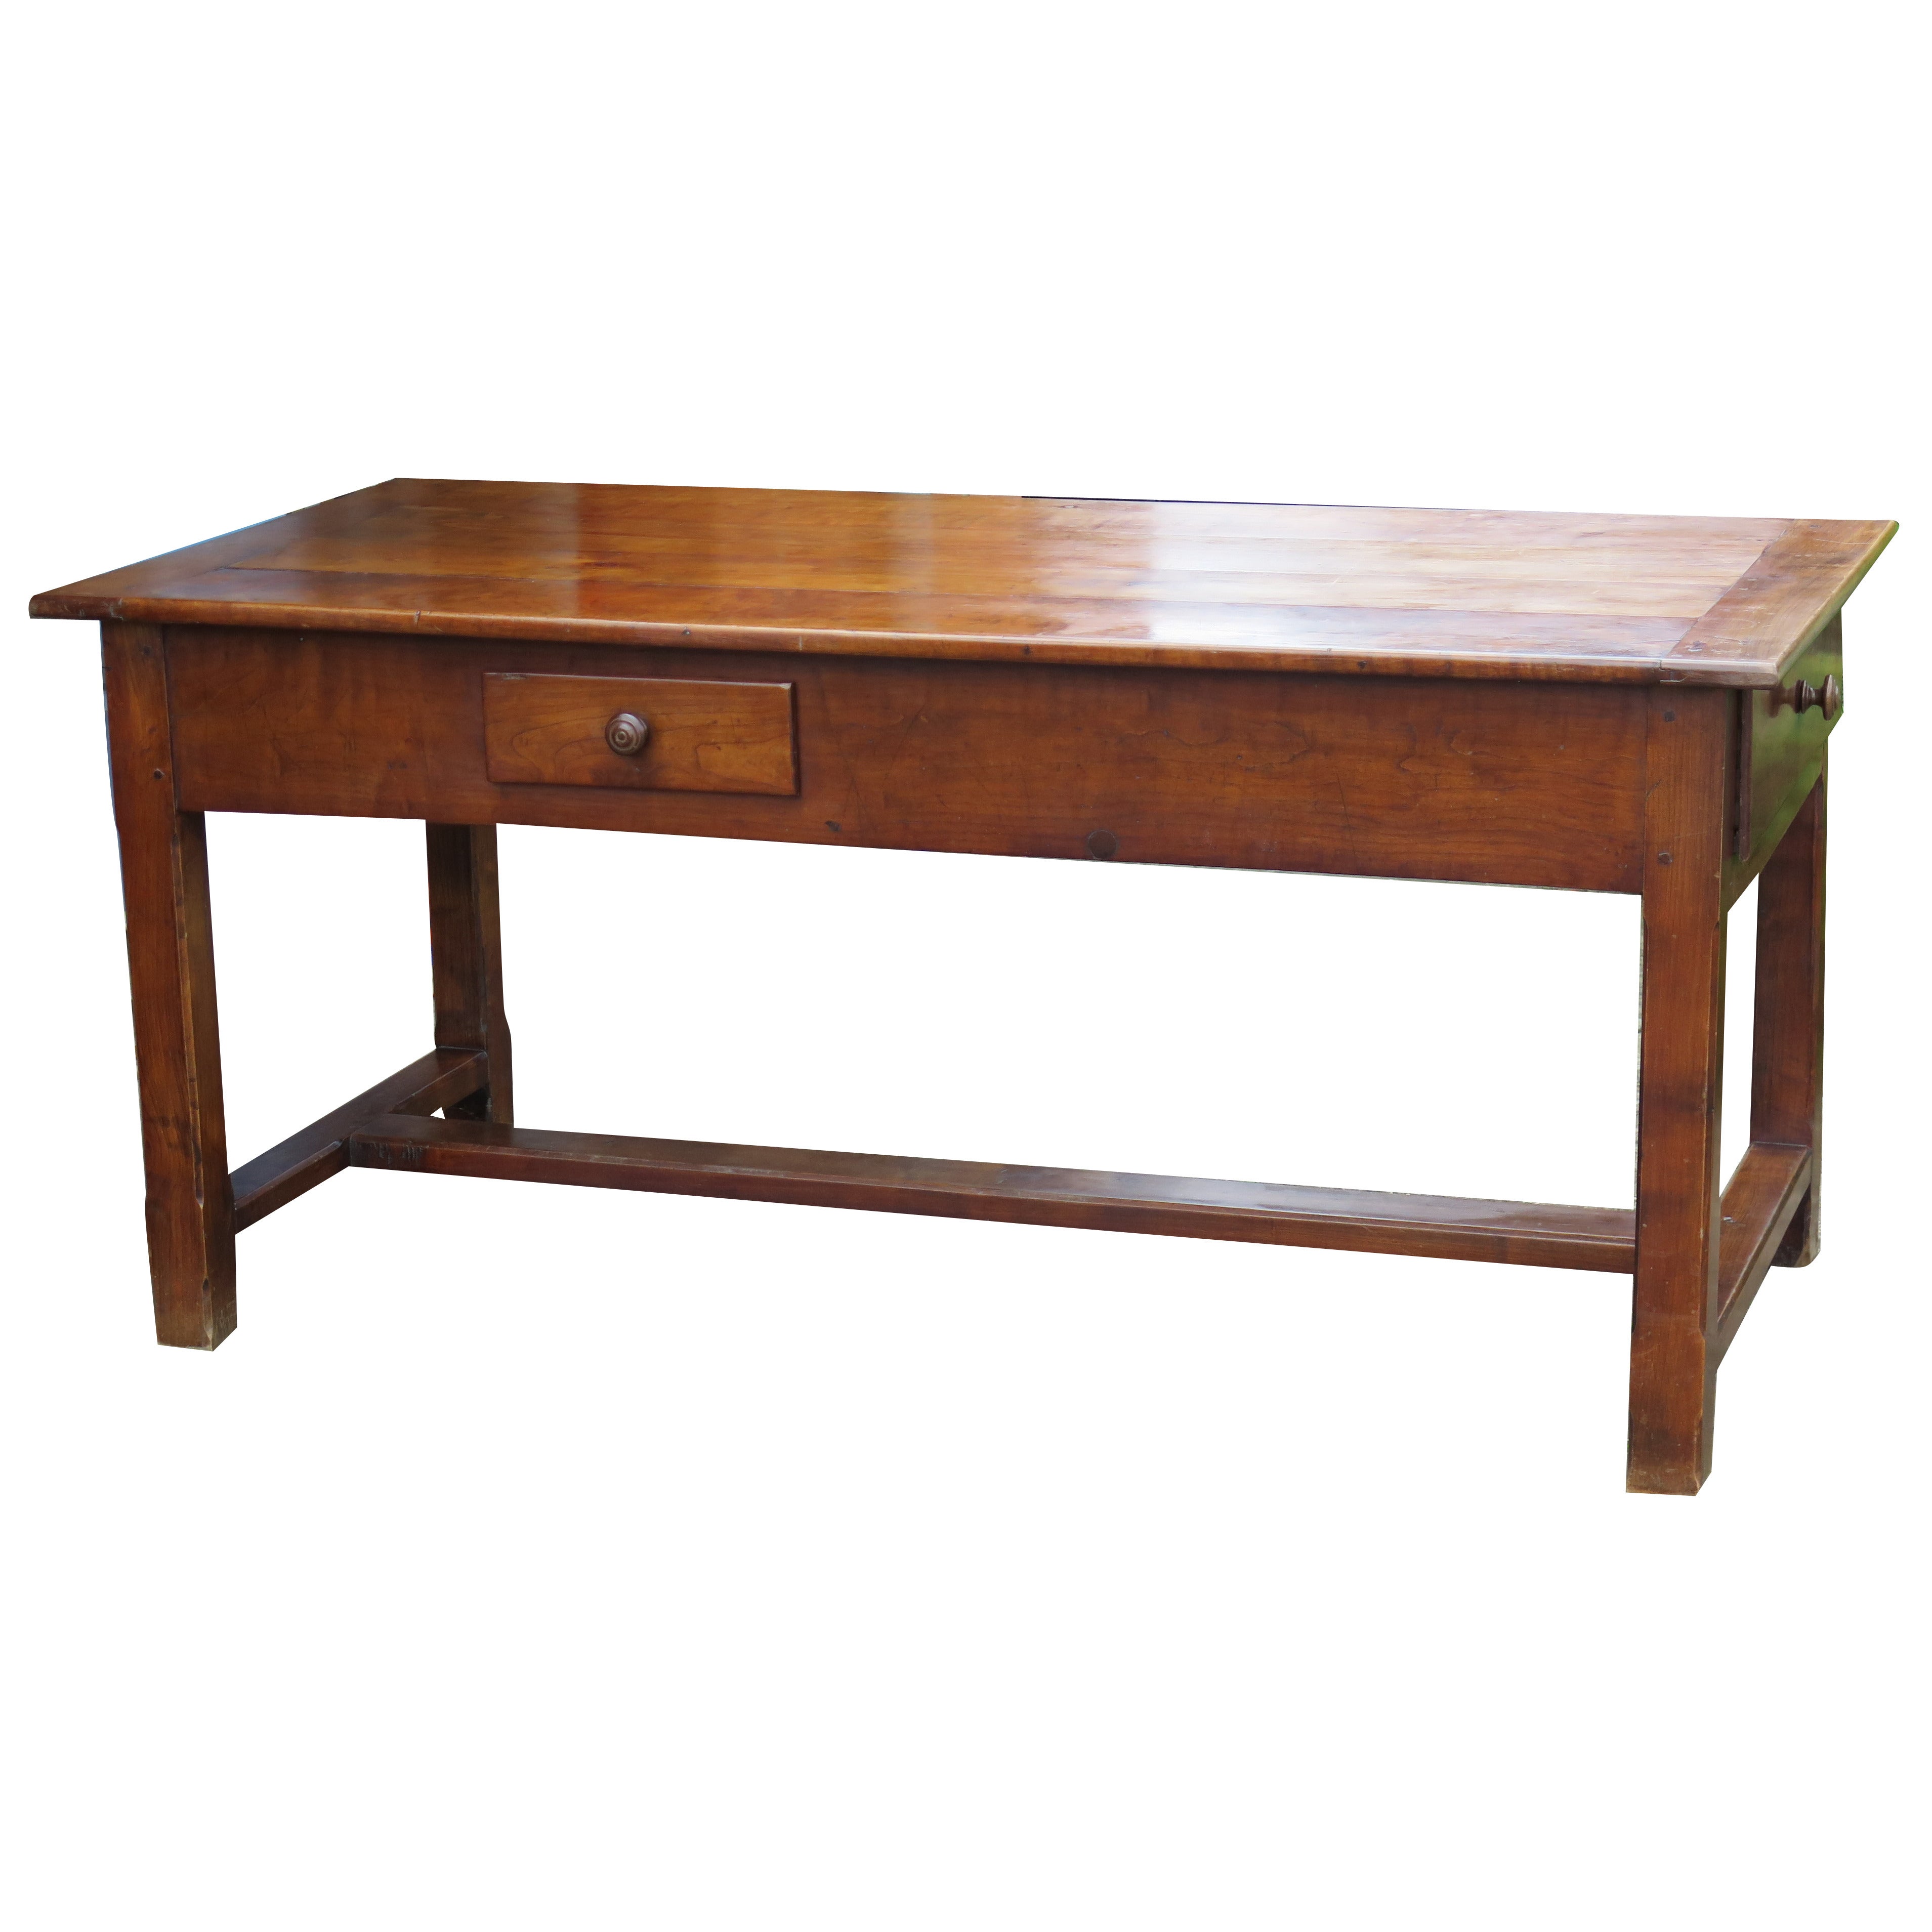 Early, 19thC, Fruitwood, REFECTORY or FARMHOUSE TABLE, French, 3-Draw